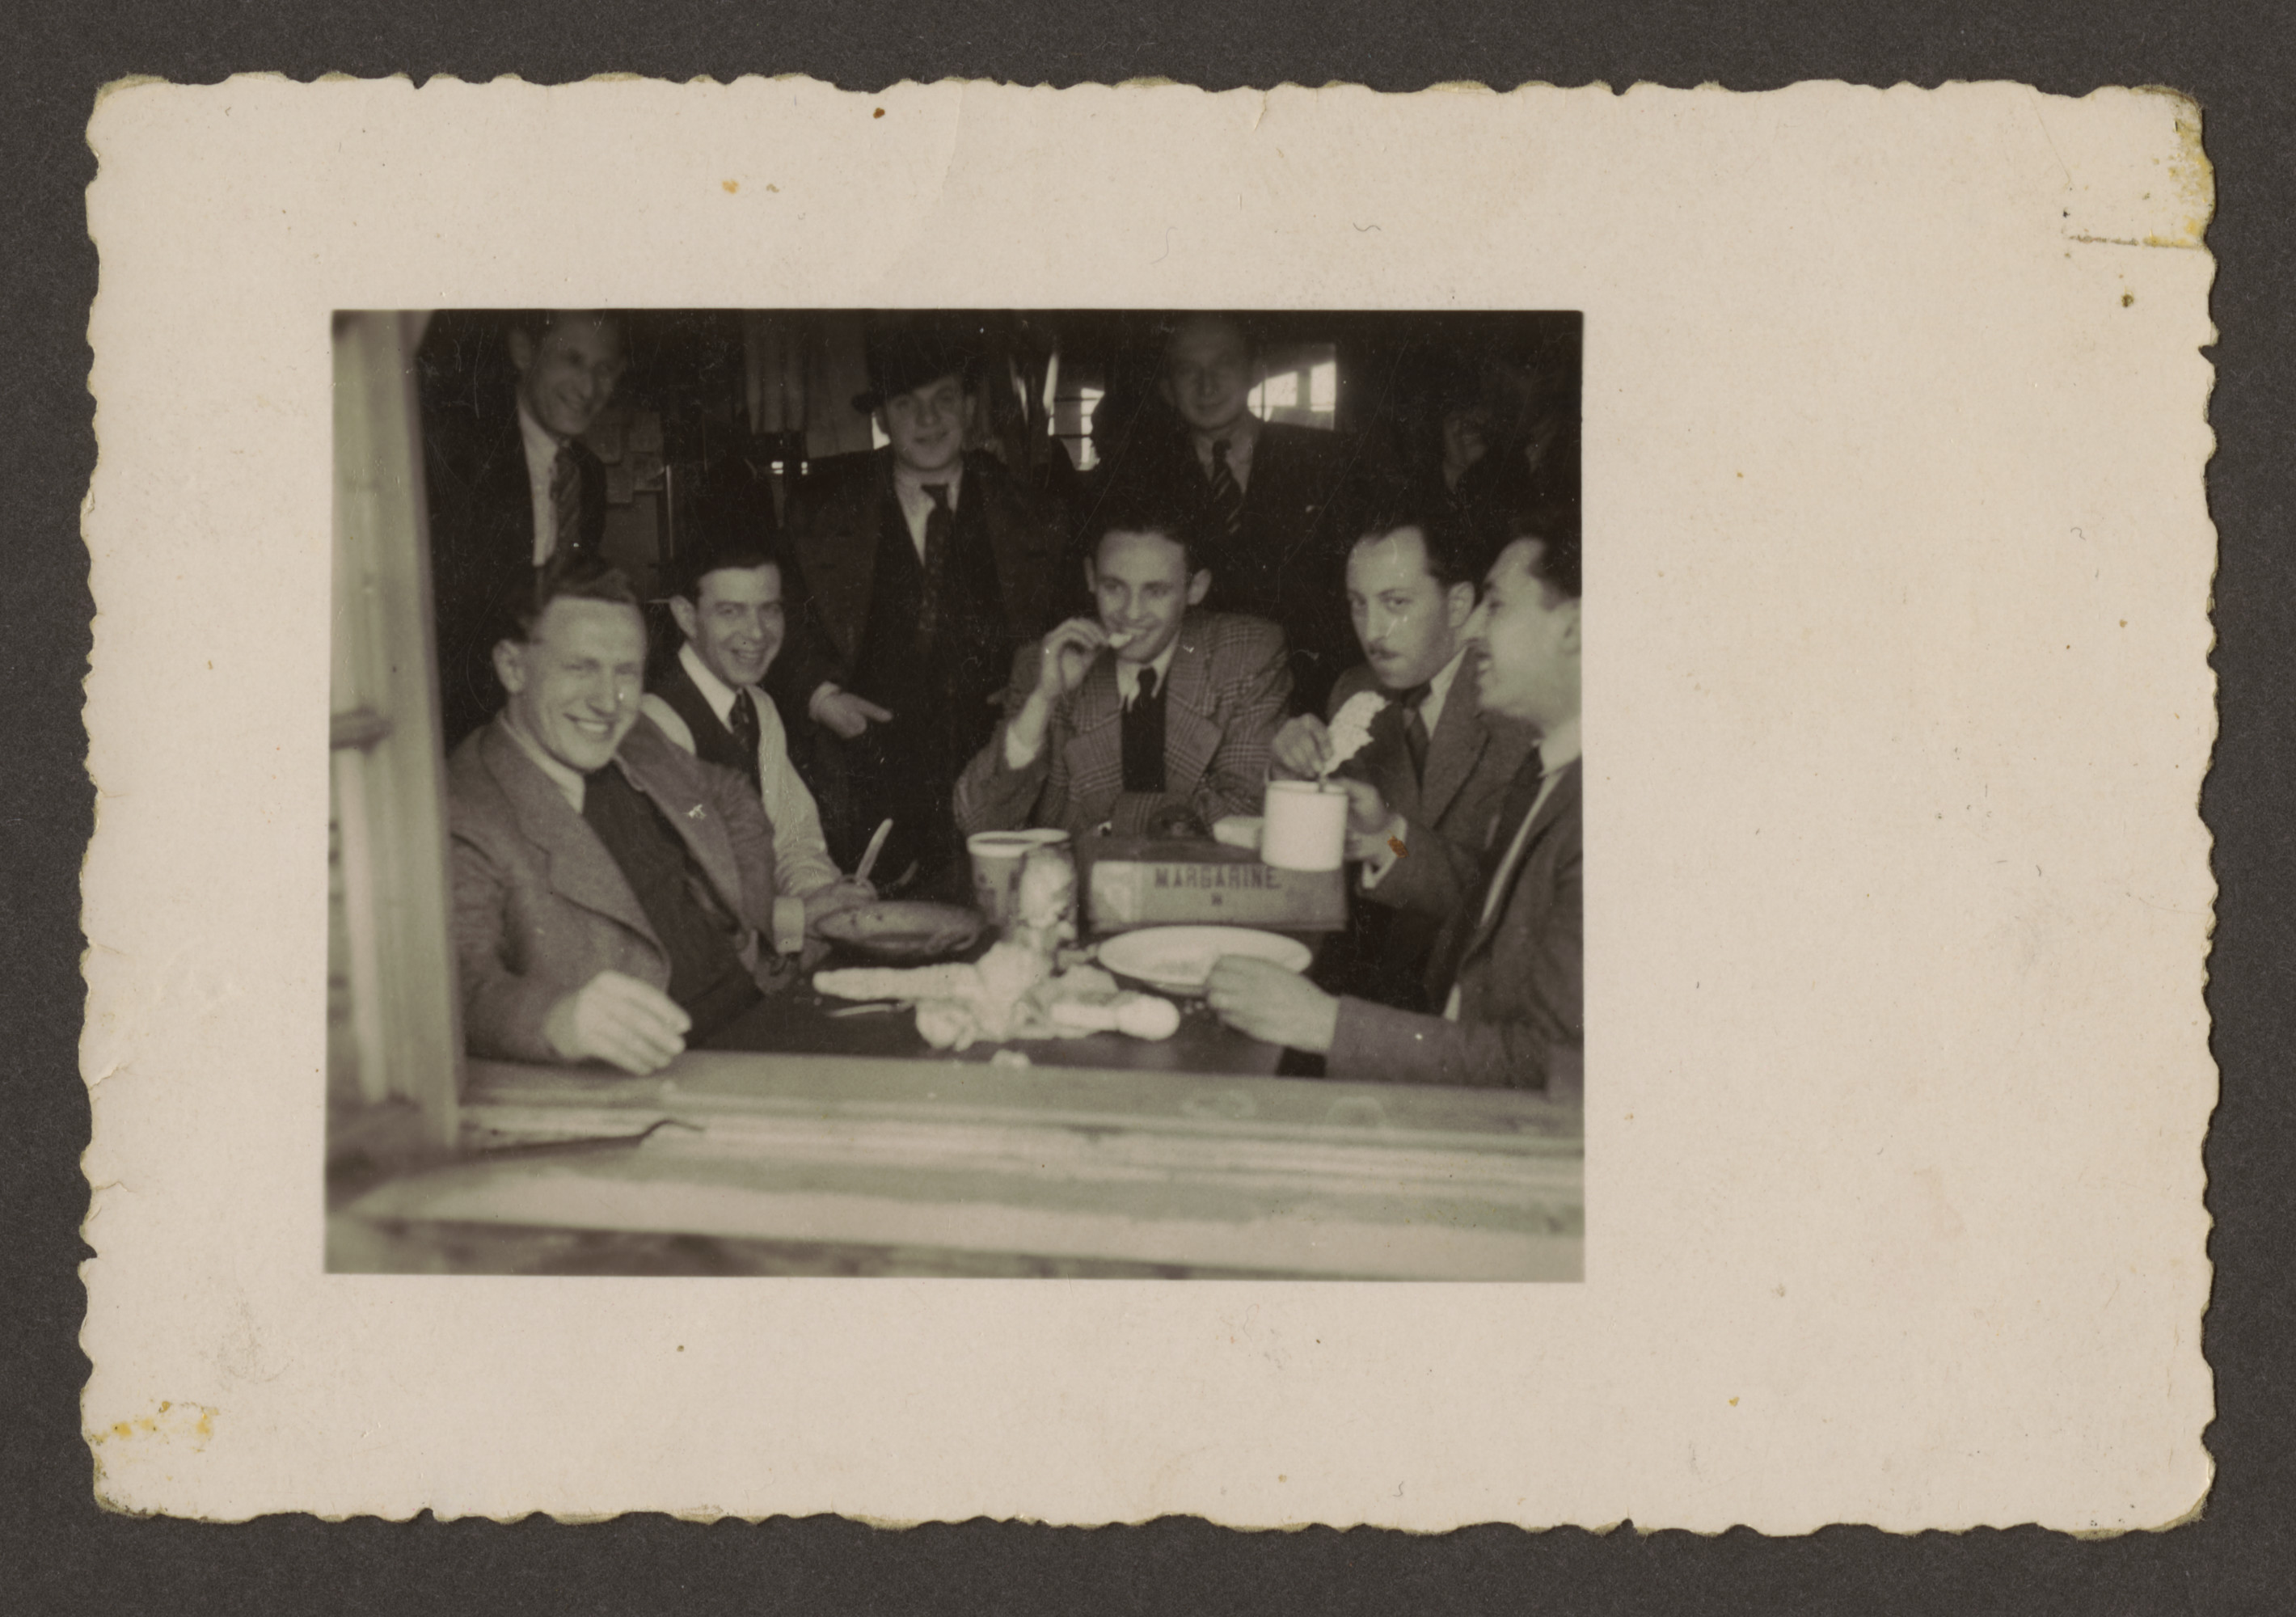 A group of friends shares a meal in the Westerbork transit camp.

Among those pictured is Erich Rosendahl (far right).